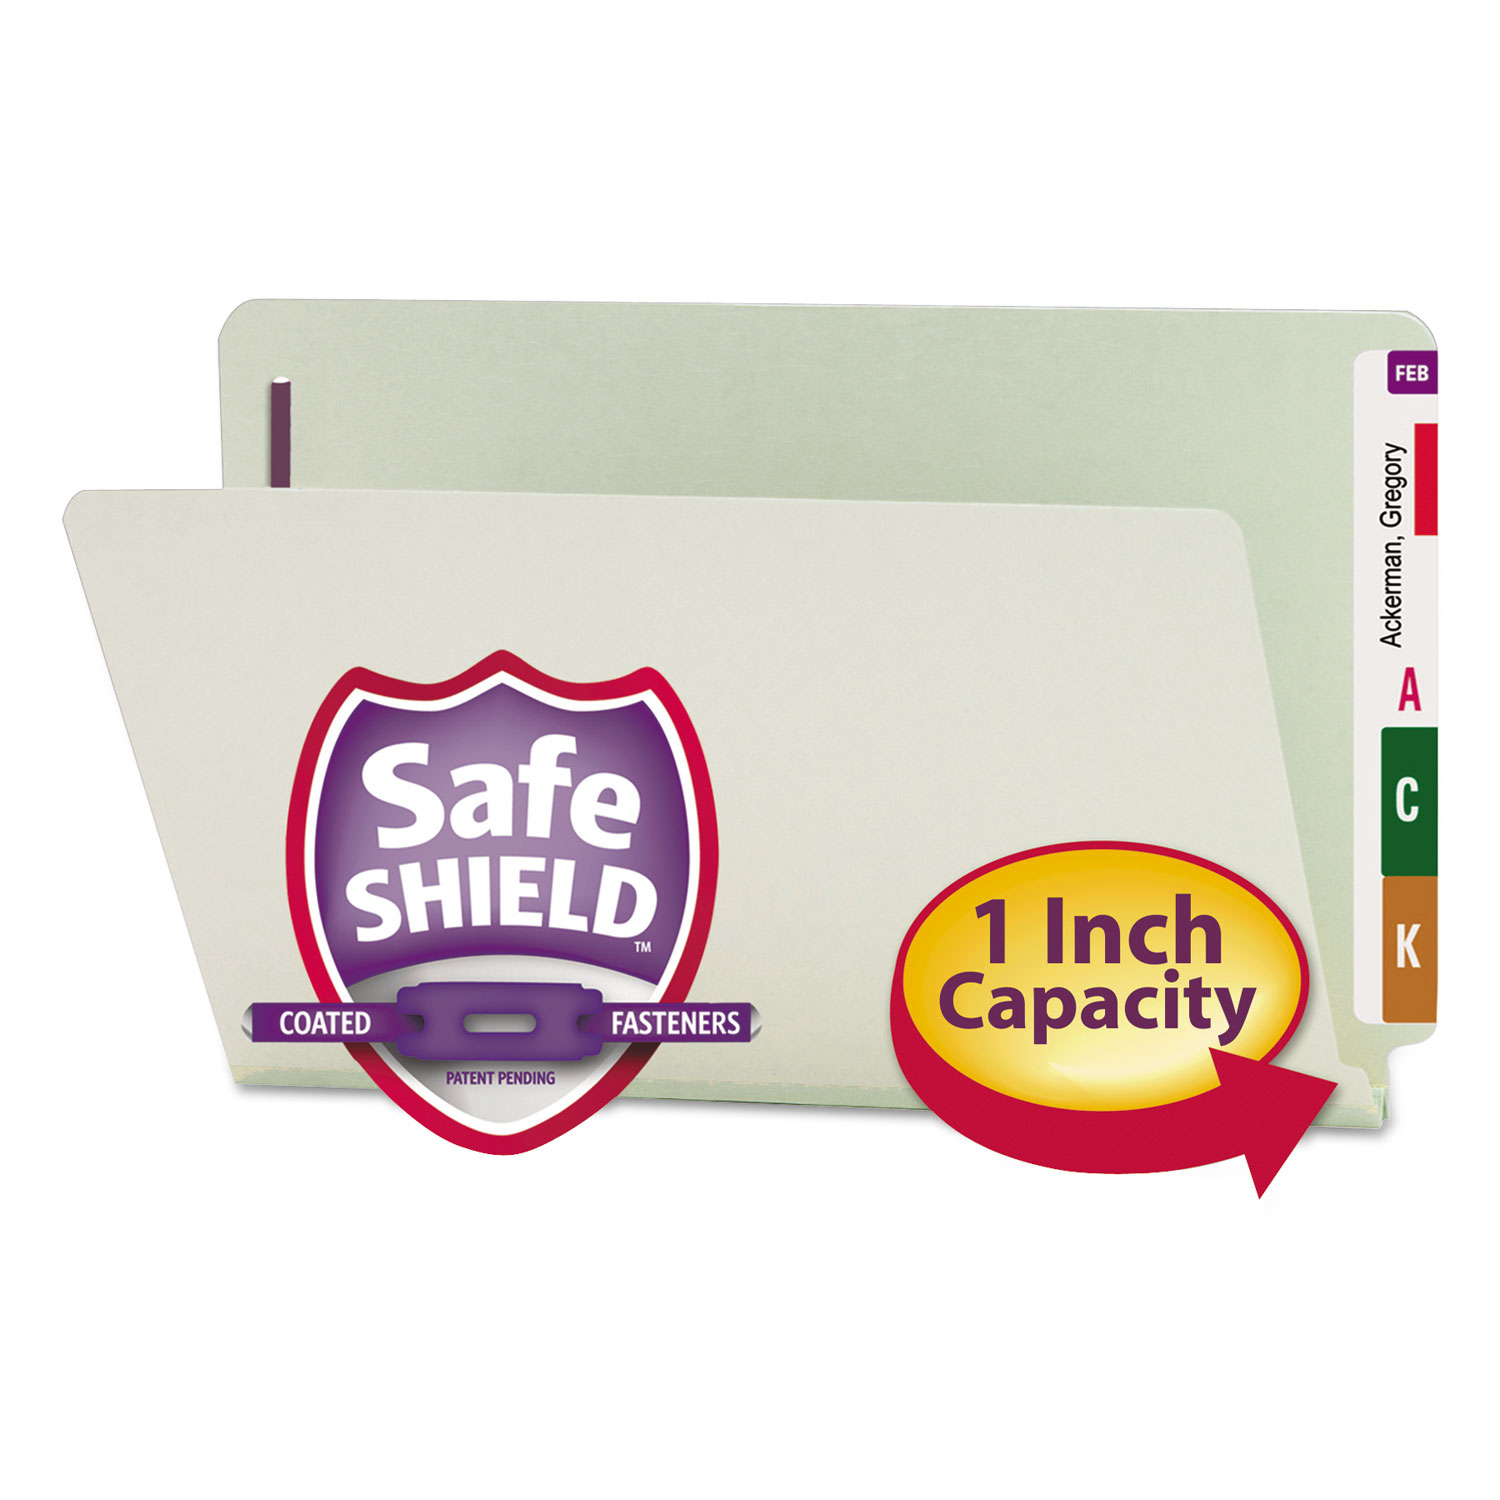 Smead 37725 Gray/Green End Tab Pressboard Fastener File Folders with SafeSHIELD Fasteners by SMD37725